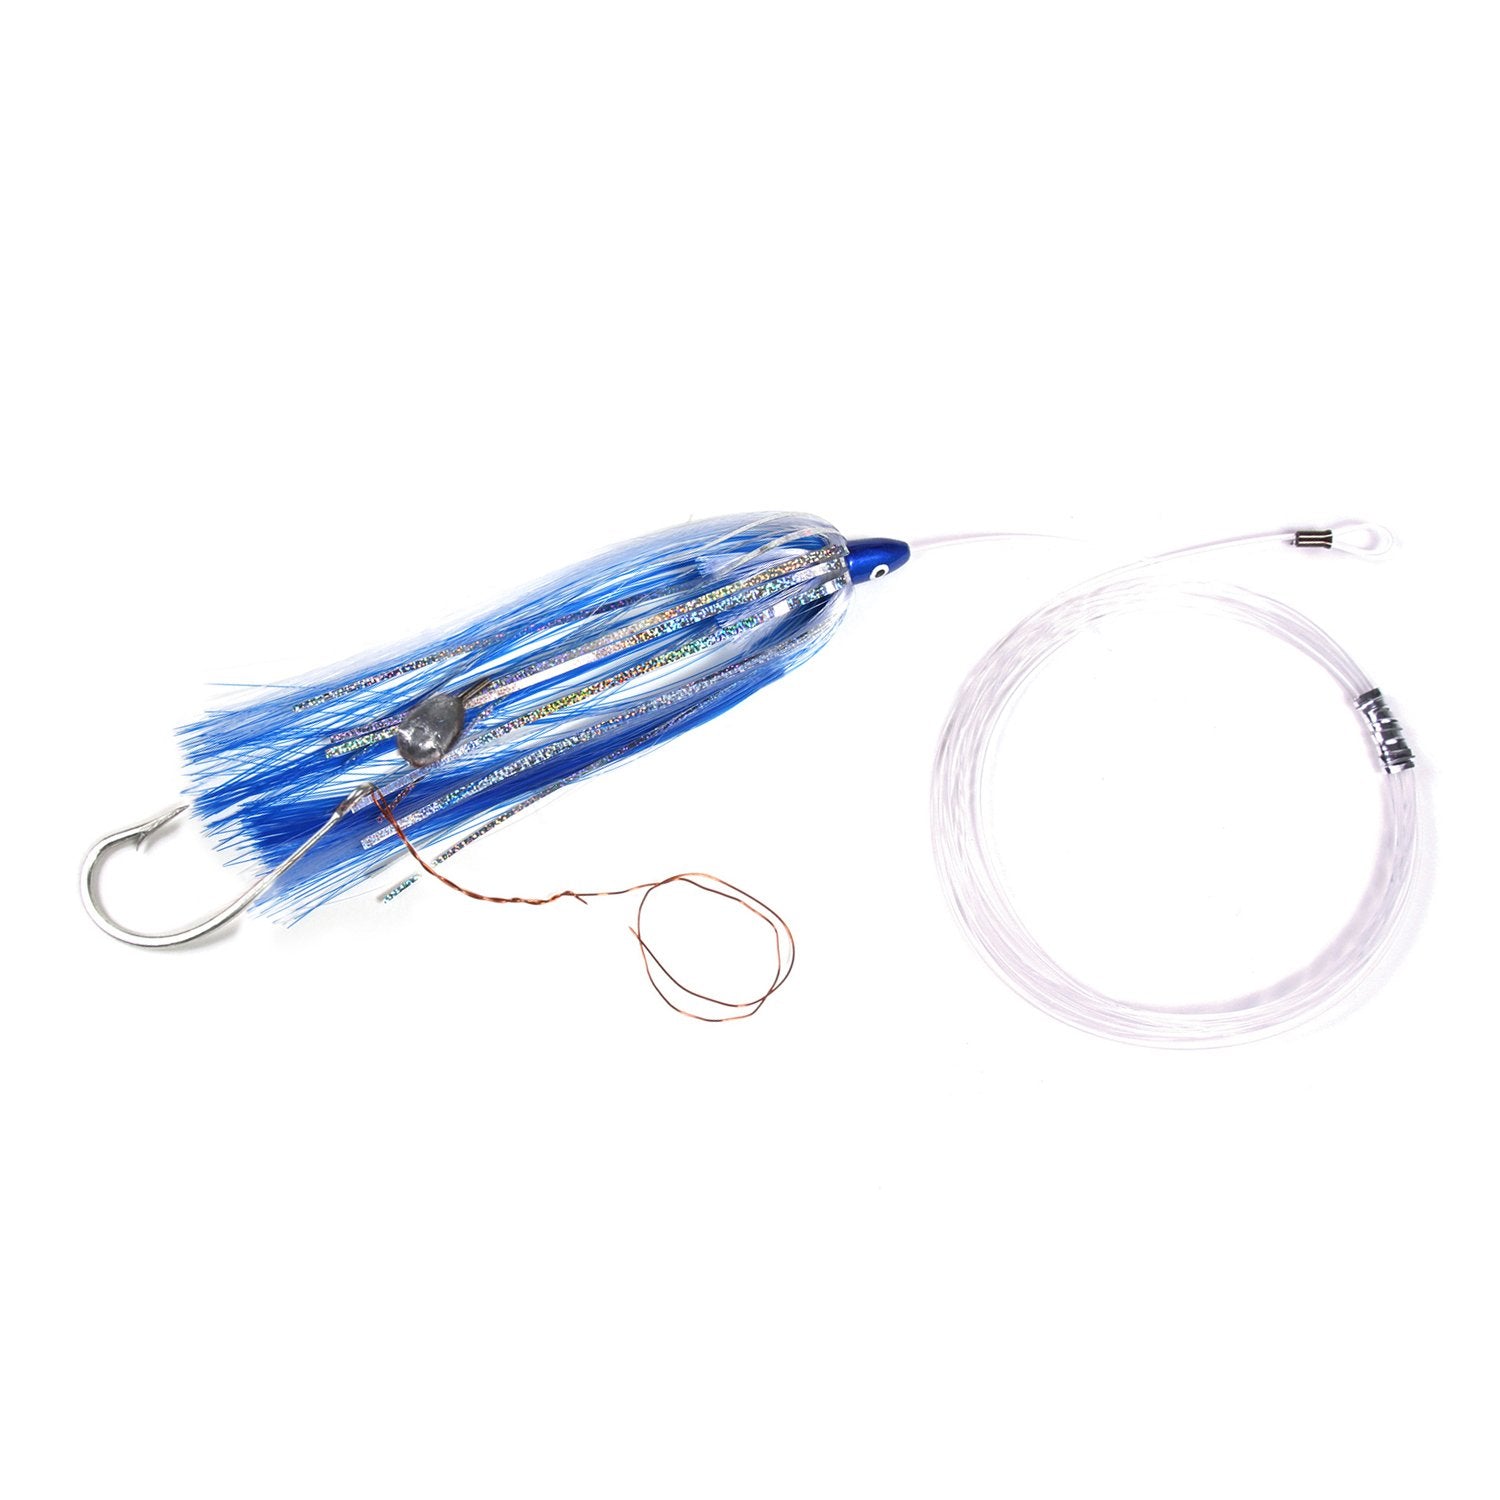 Billy Baits BB-DCR03 Double Cavitator Trolling Lure Rigged 